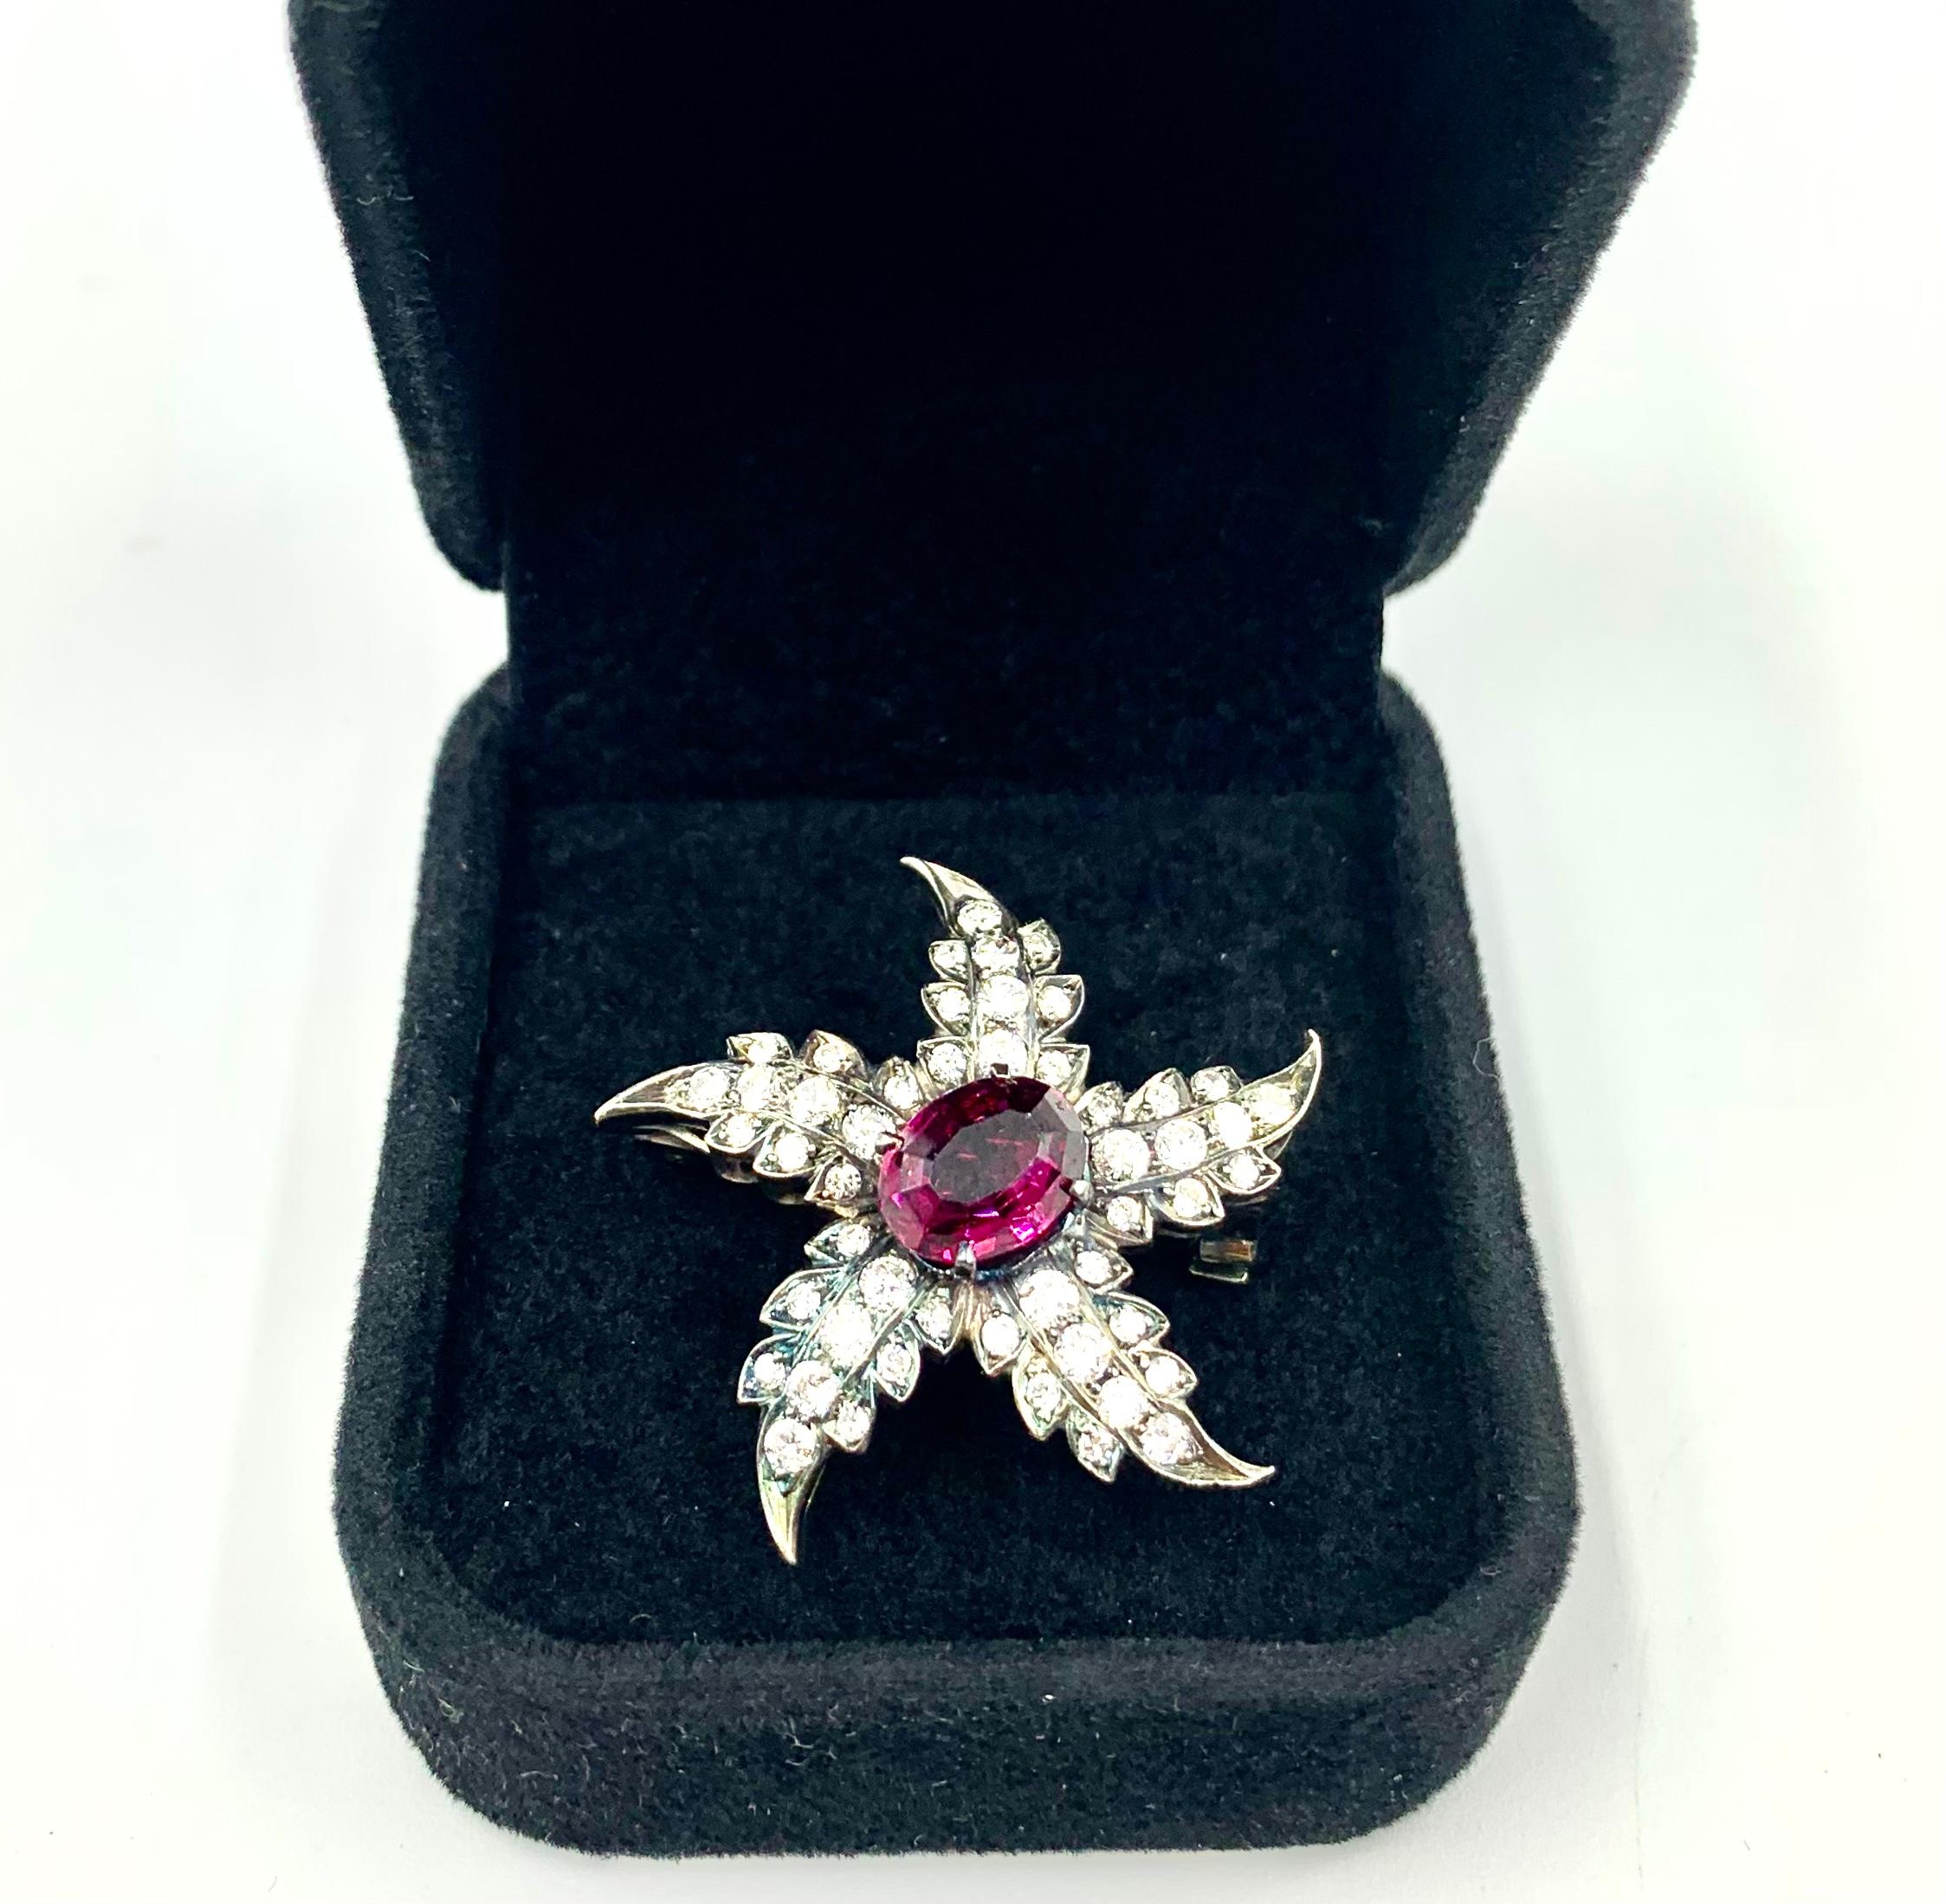 Fine Georgian style rich ruby red oval Rhodolite garnet center stone starfish pendant/brooch with full cut diamond encrusted arms. This piece is fitted with a bale in the back to be worn as a pendant as well as a clasp for use as a brooch, lovely